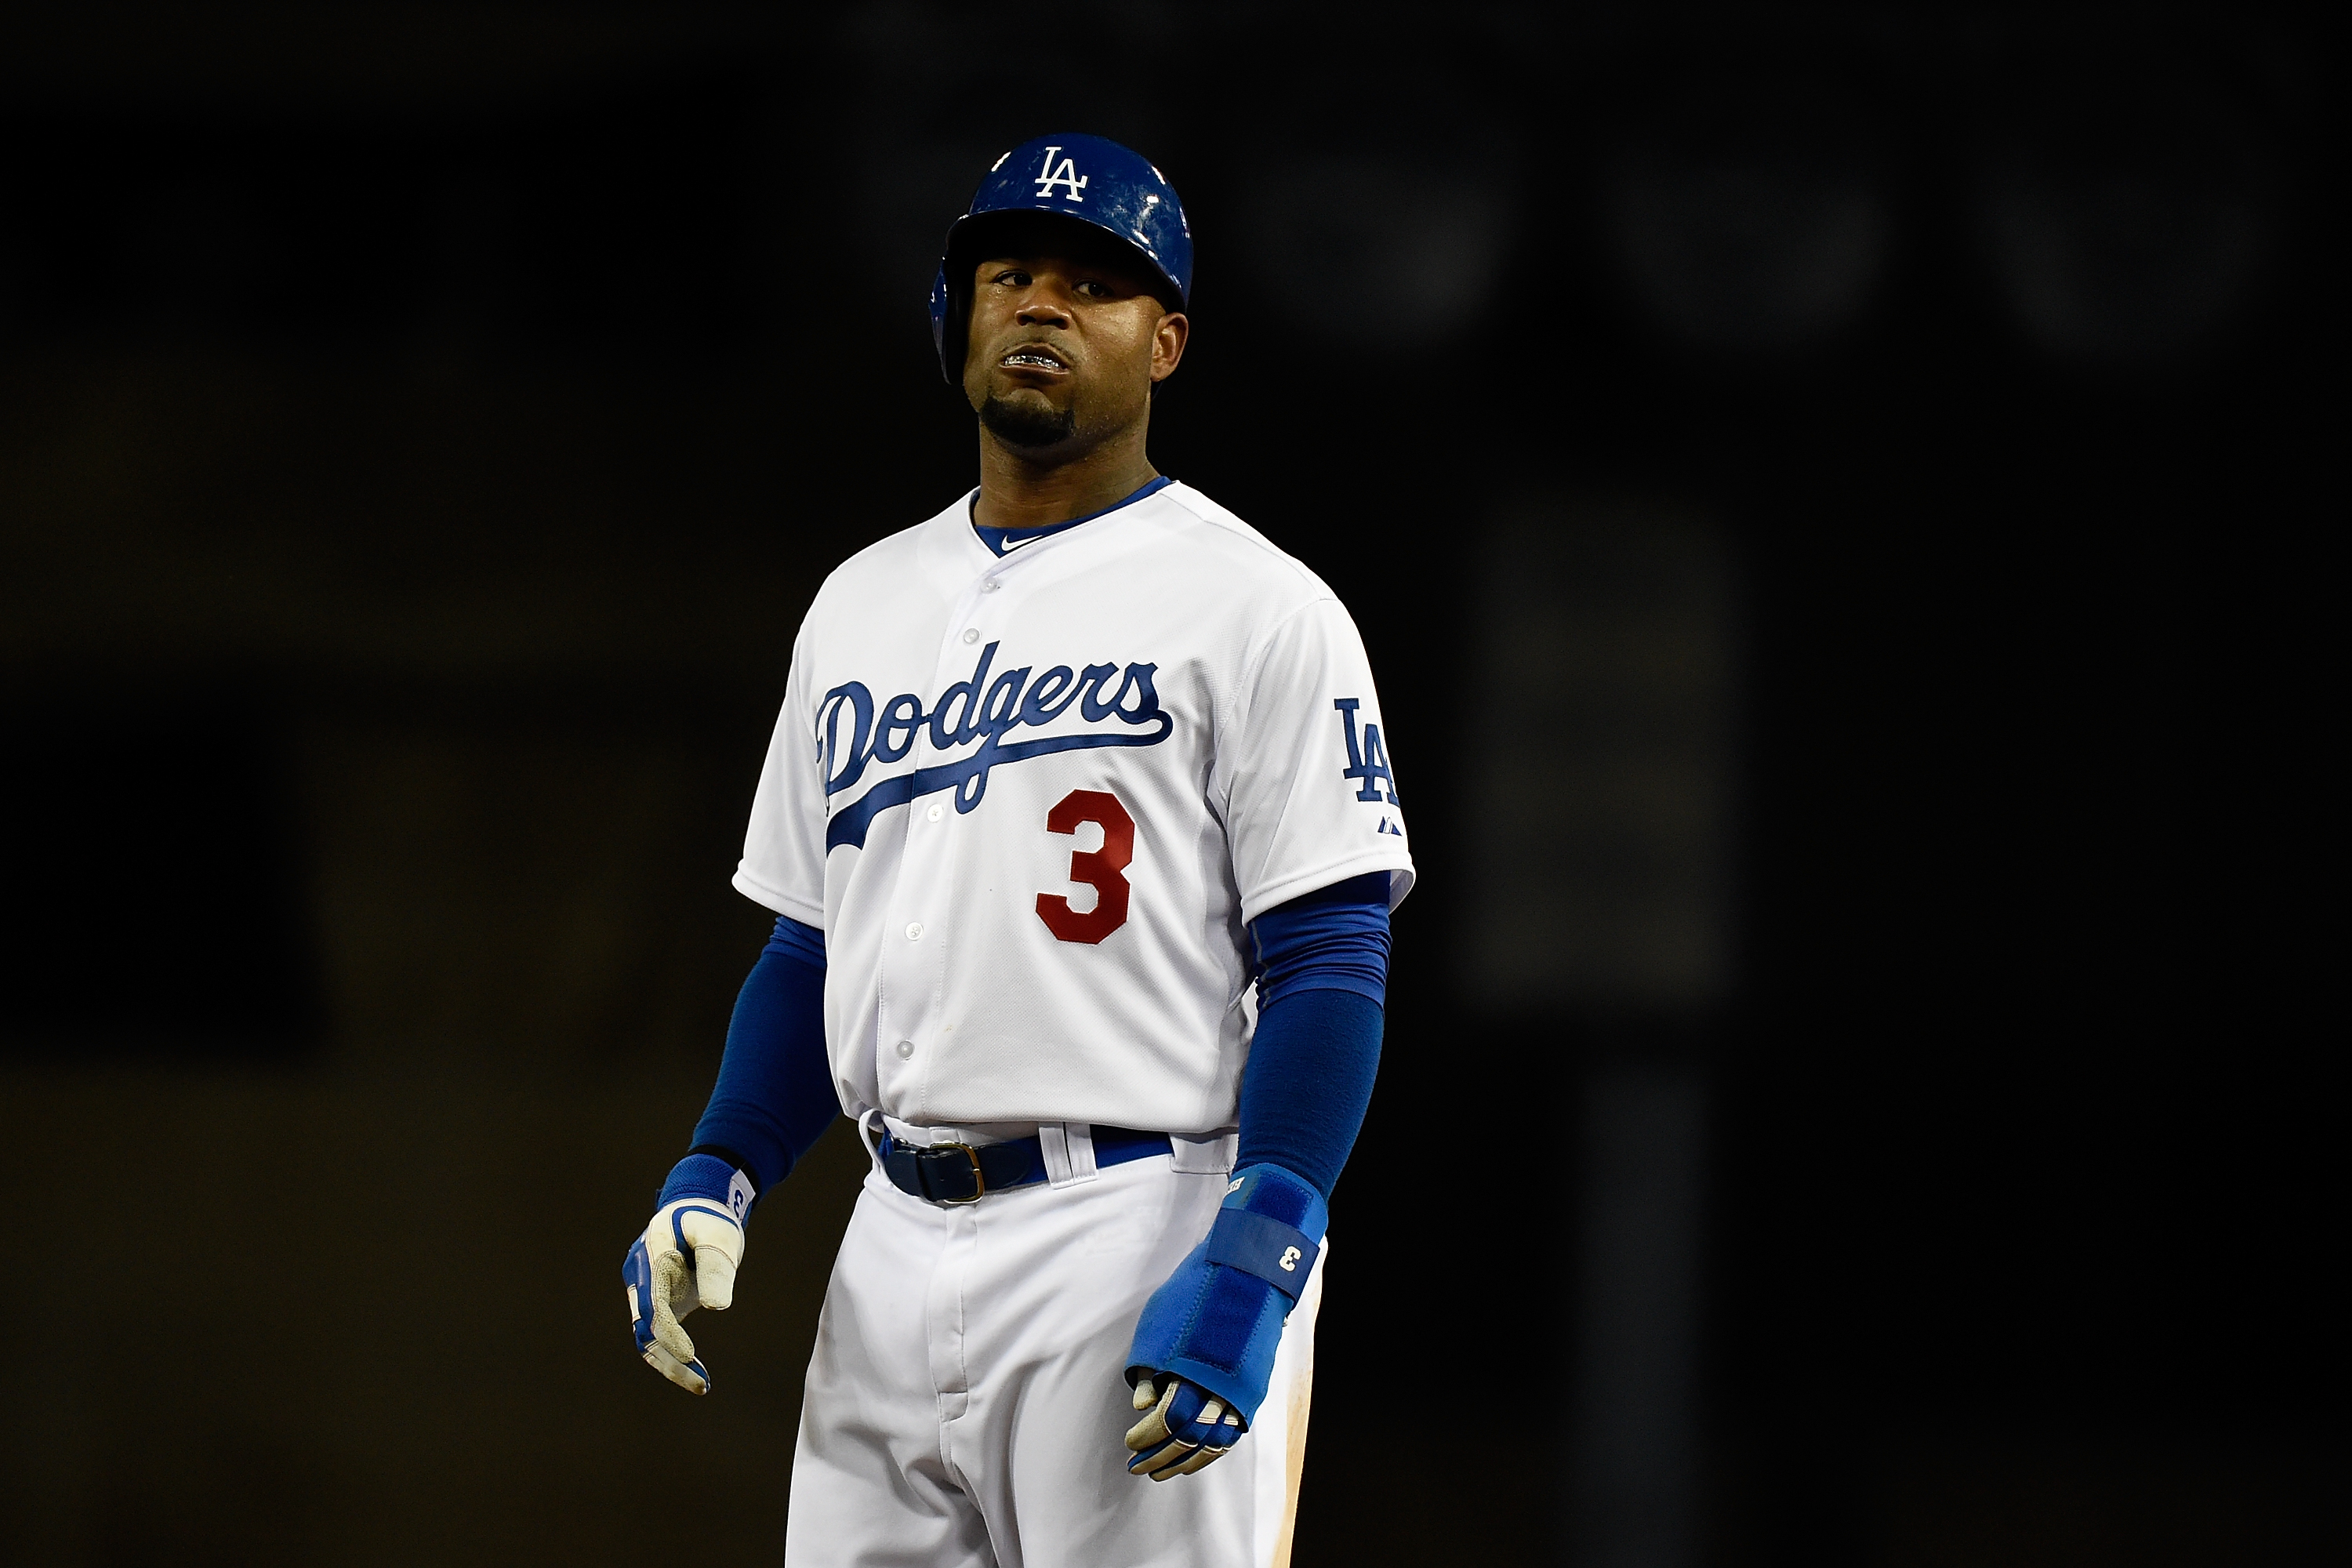 Parent of 5-year-old suing former MLB player Carl Crawford for $1M